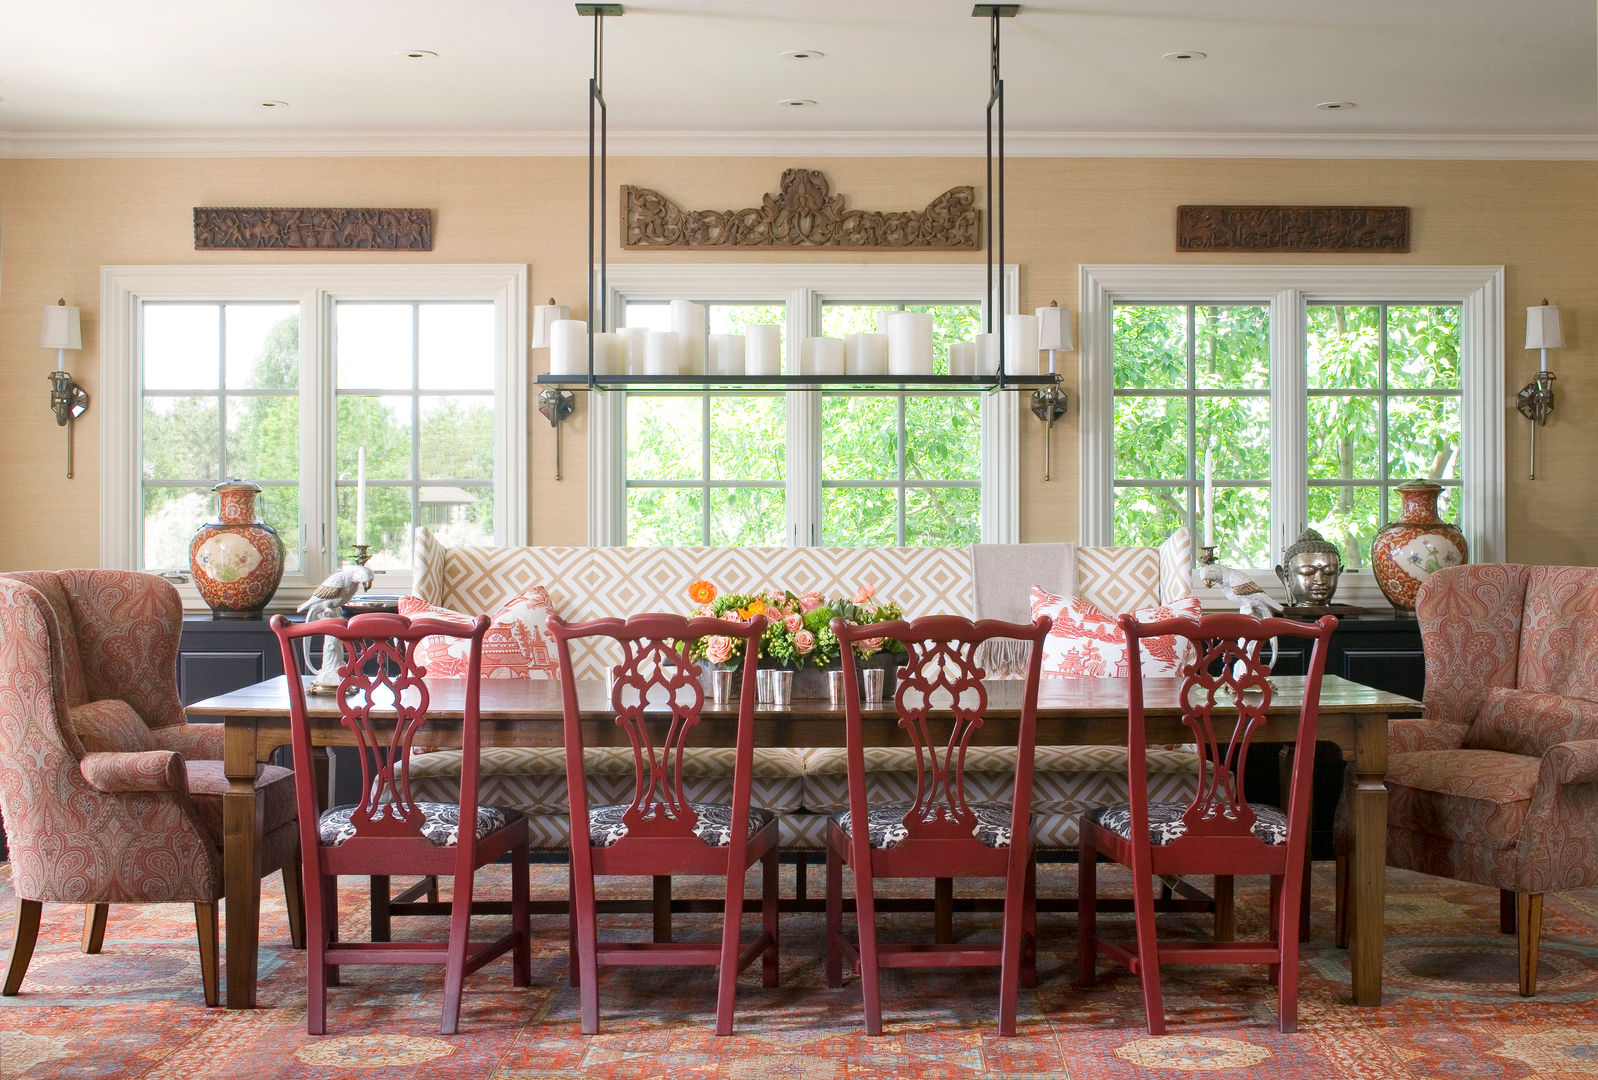 Home of the Year, Andrea Schumacher Interiors Andrea Schumacher Interiors Comedores clásicos